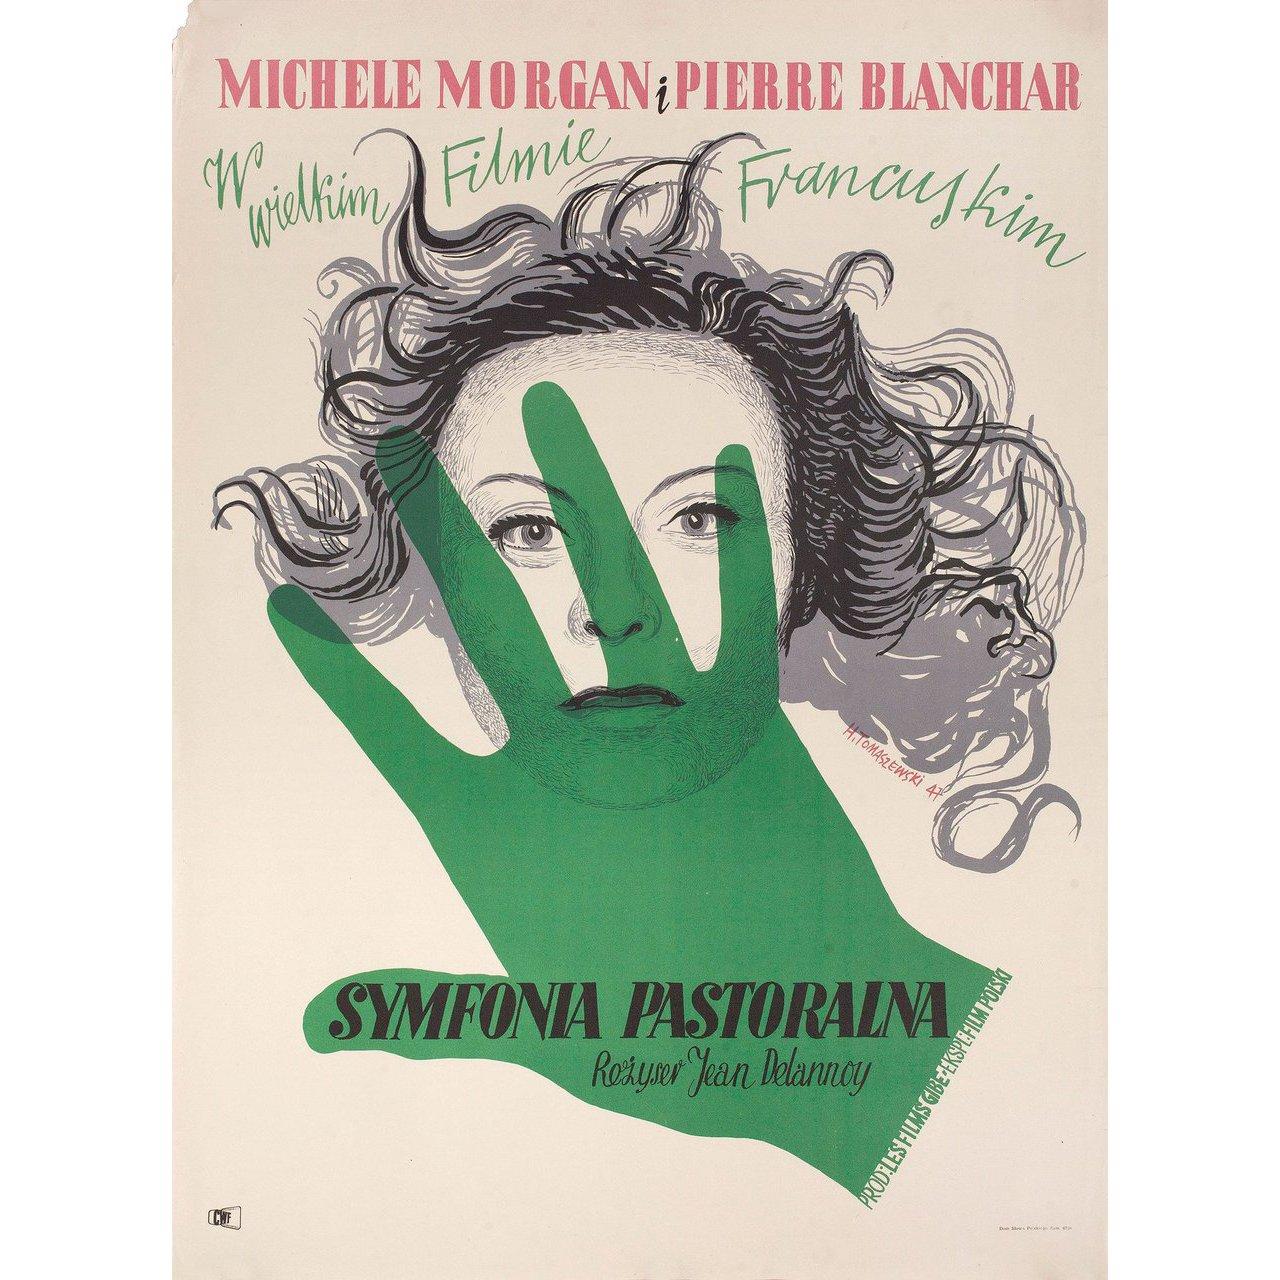 Original 1957 re-release polish A1 poster for. Very good-fine condition, folded. Many original posters were issued folded or were subsequently folded. Please note: the size is stated in inches and the actual size can vary by an inch or more.
     